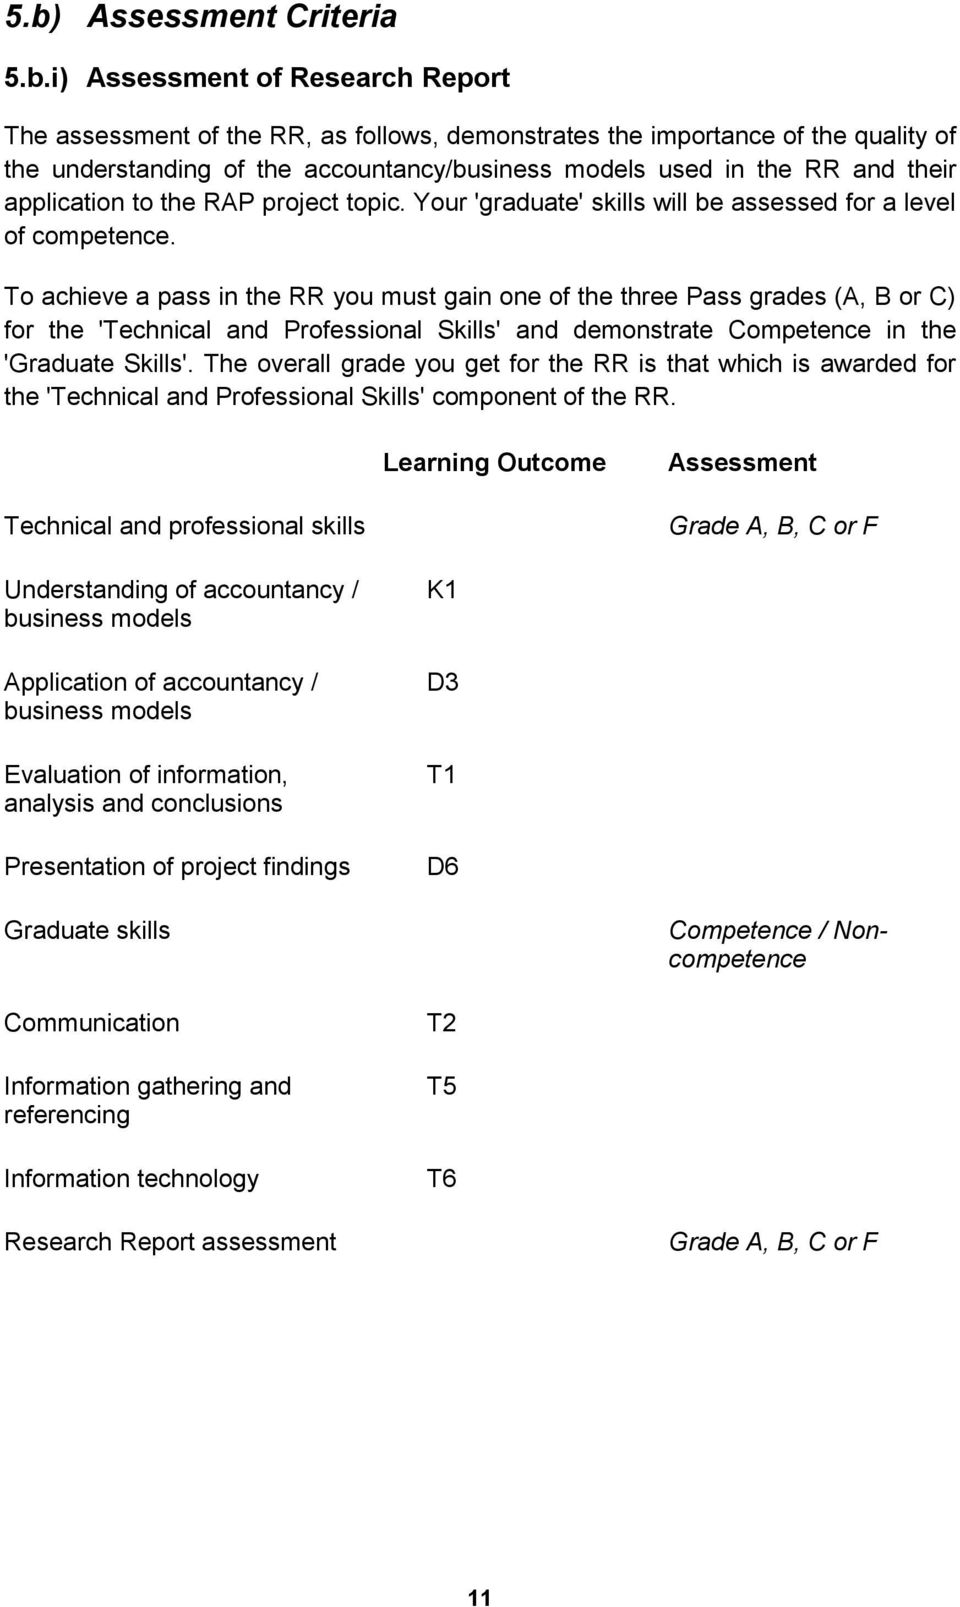 To achieve a pass in the RR you must gain one of the three Pass grades (A, B or C) for the 'Technical and Professional Skills' and demonstrate Competence in the 'Graduate Skills'.